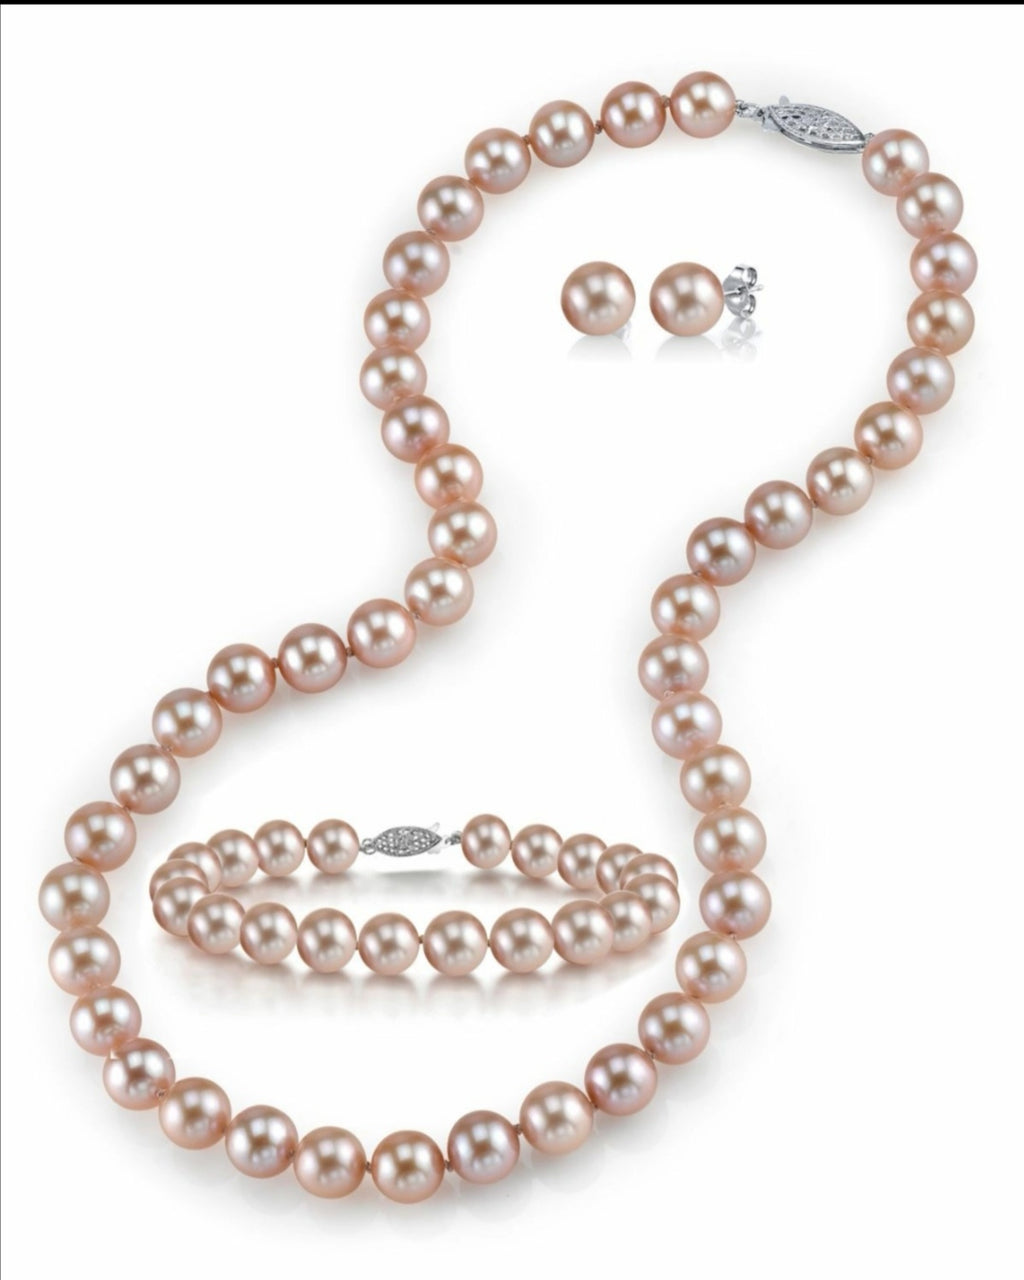 Classic Pearl Necklace Set 7-8mm - Angel the Pearl Girl